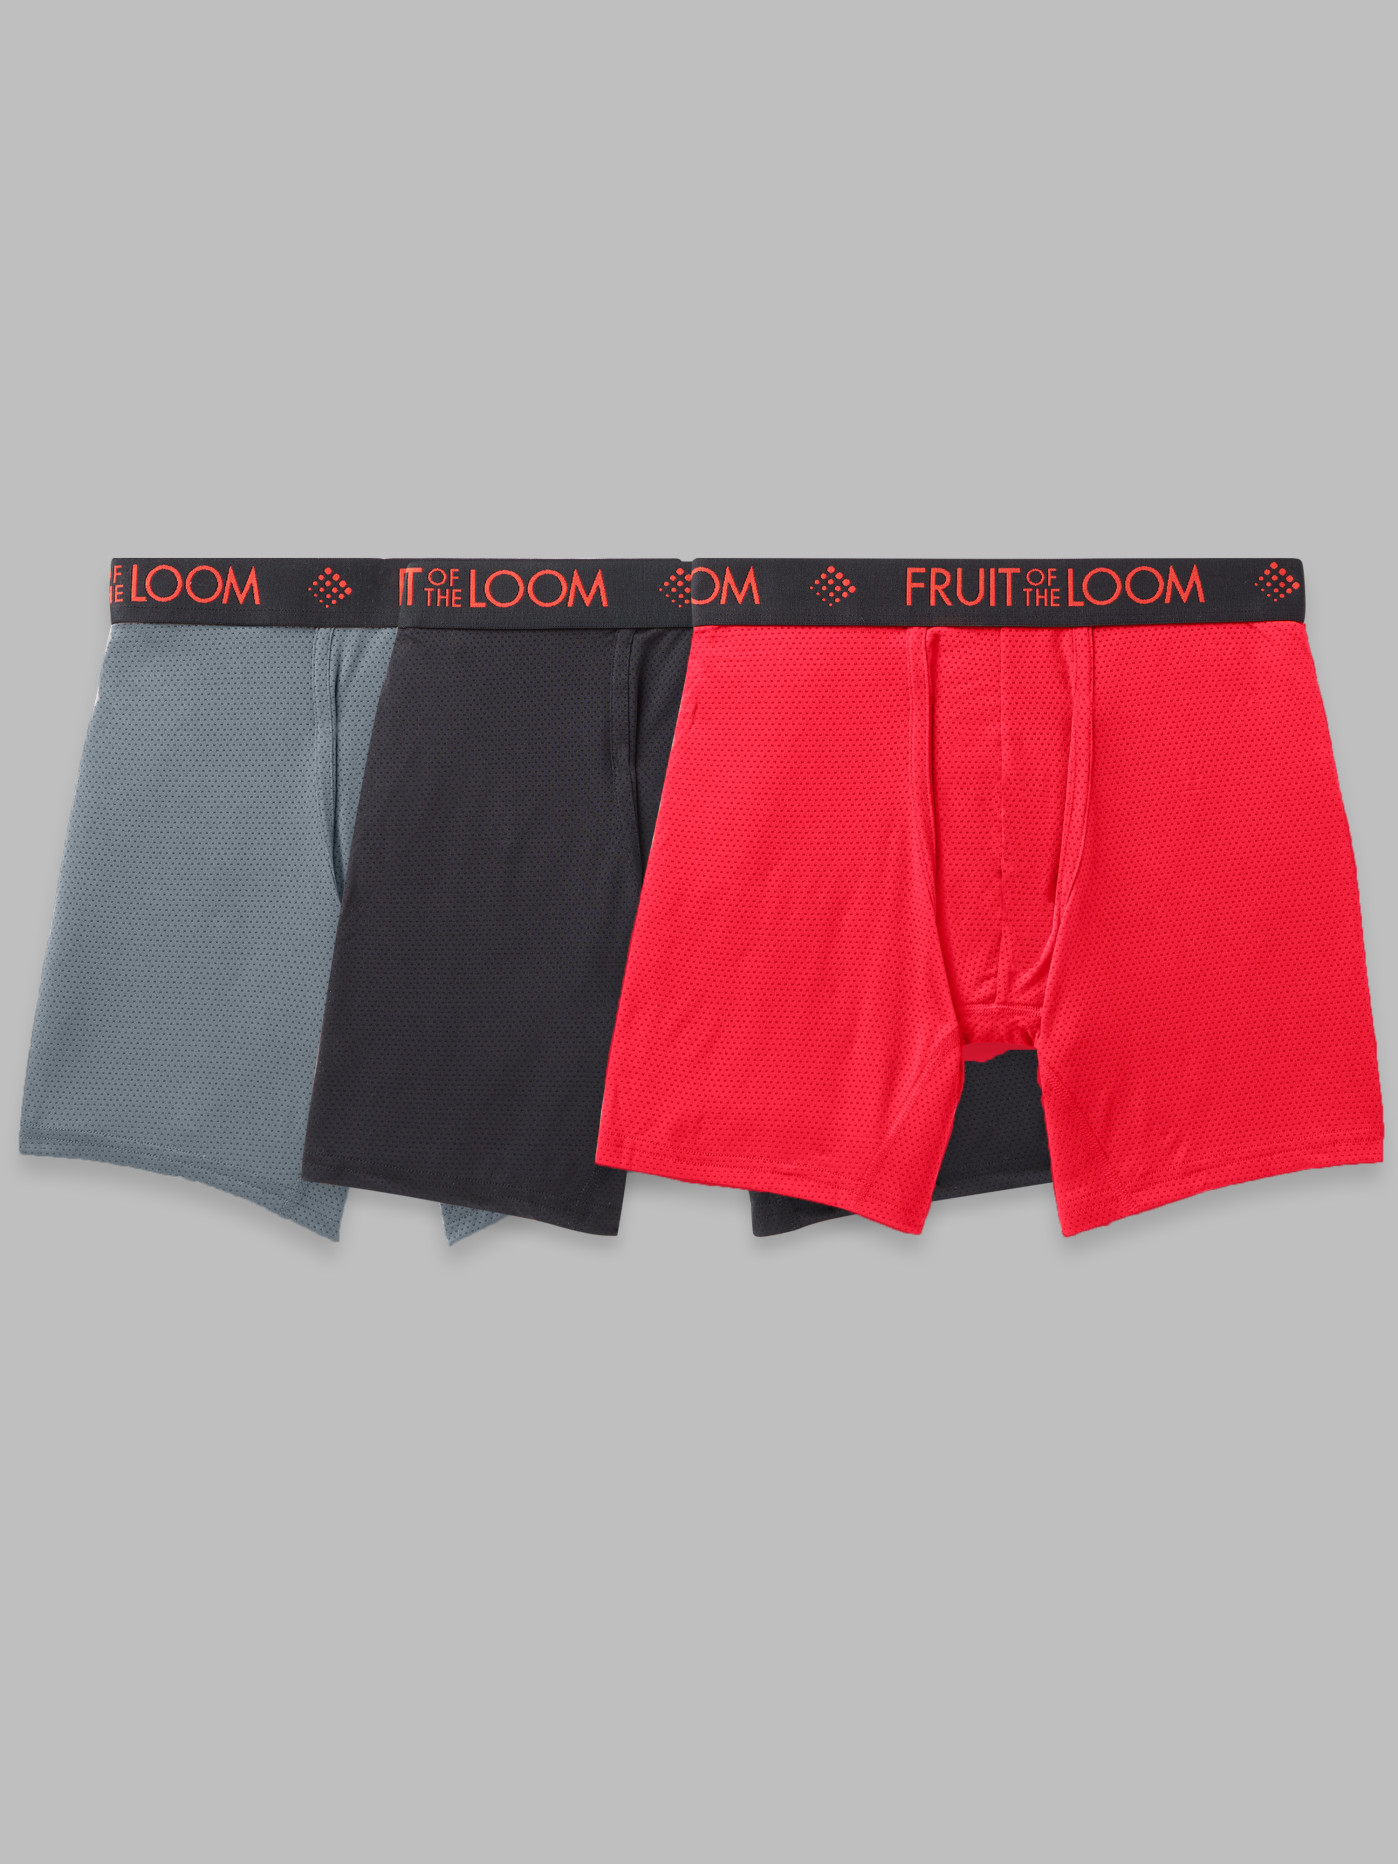 Fruit of the Loom Men's Breathable Performance Boxer Briefs, 3 Pack 